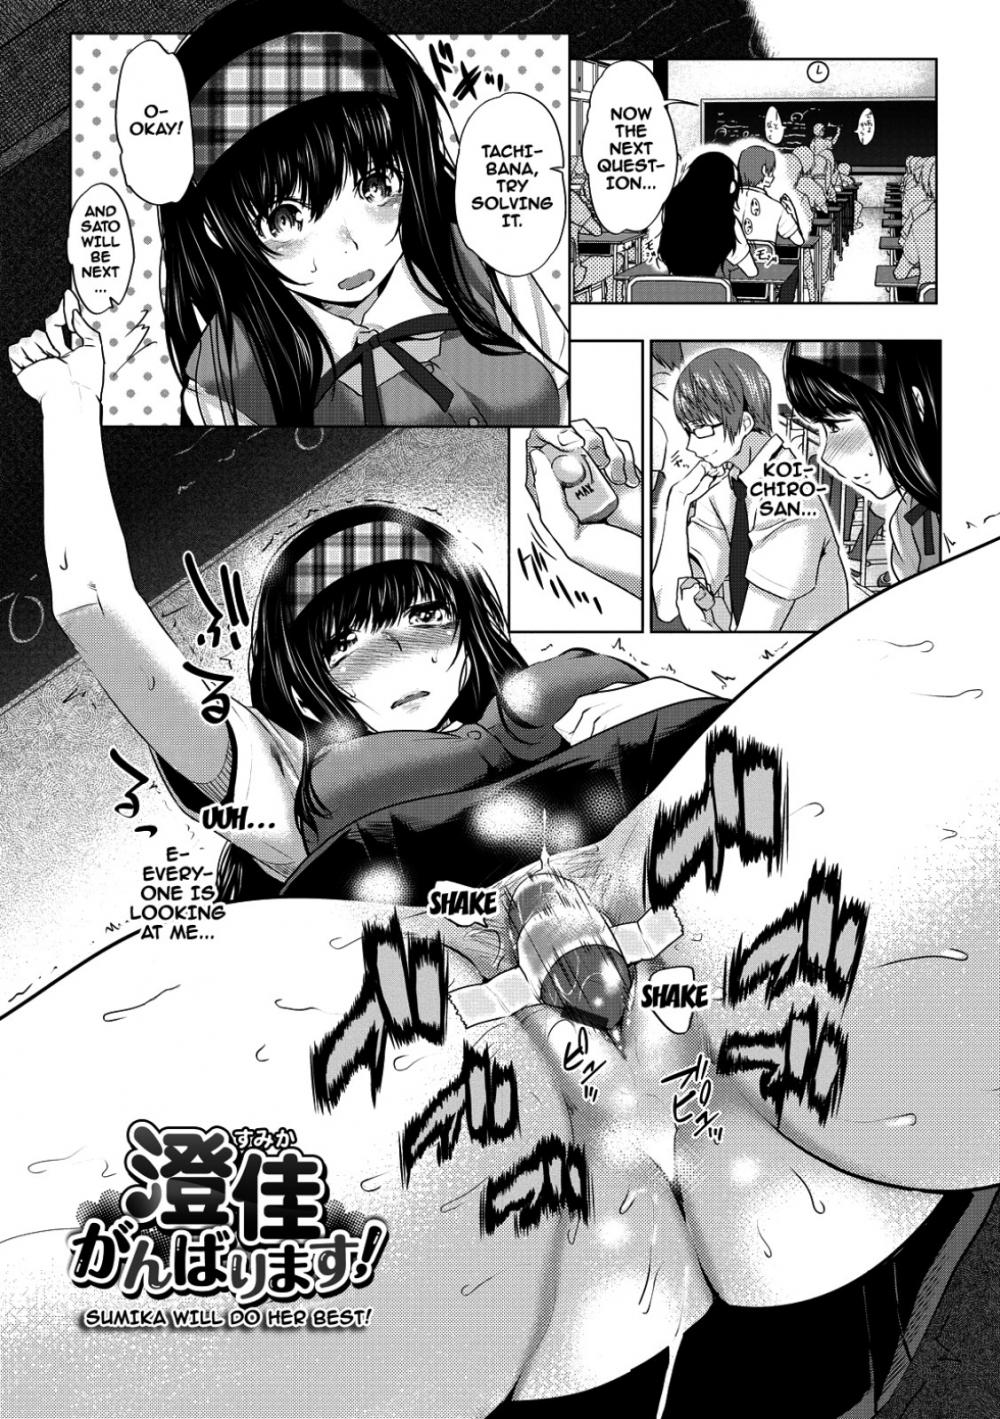 Hentai Manga Comic-The Right Way To Get Females With Child-Chapter 5-1